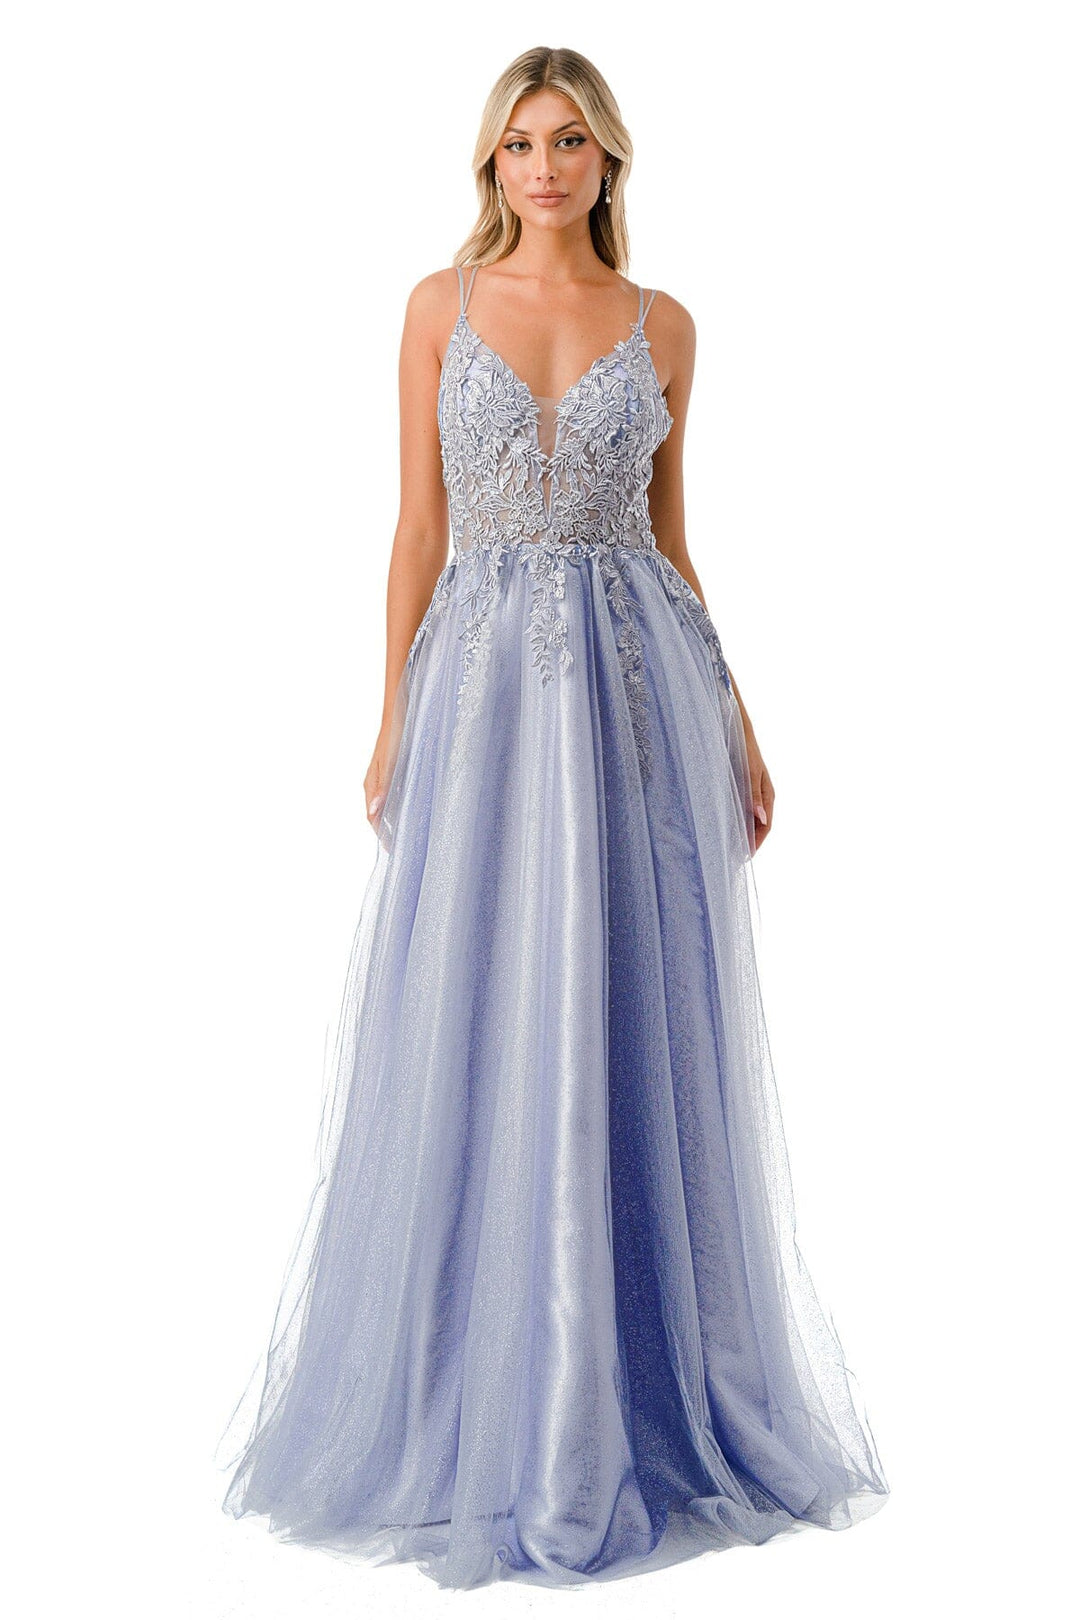 Embroidered Sweetheart Tulle Gown by Coya L2790W